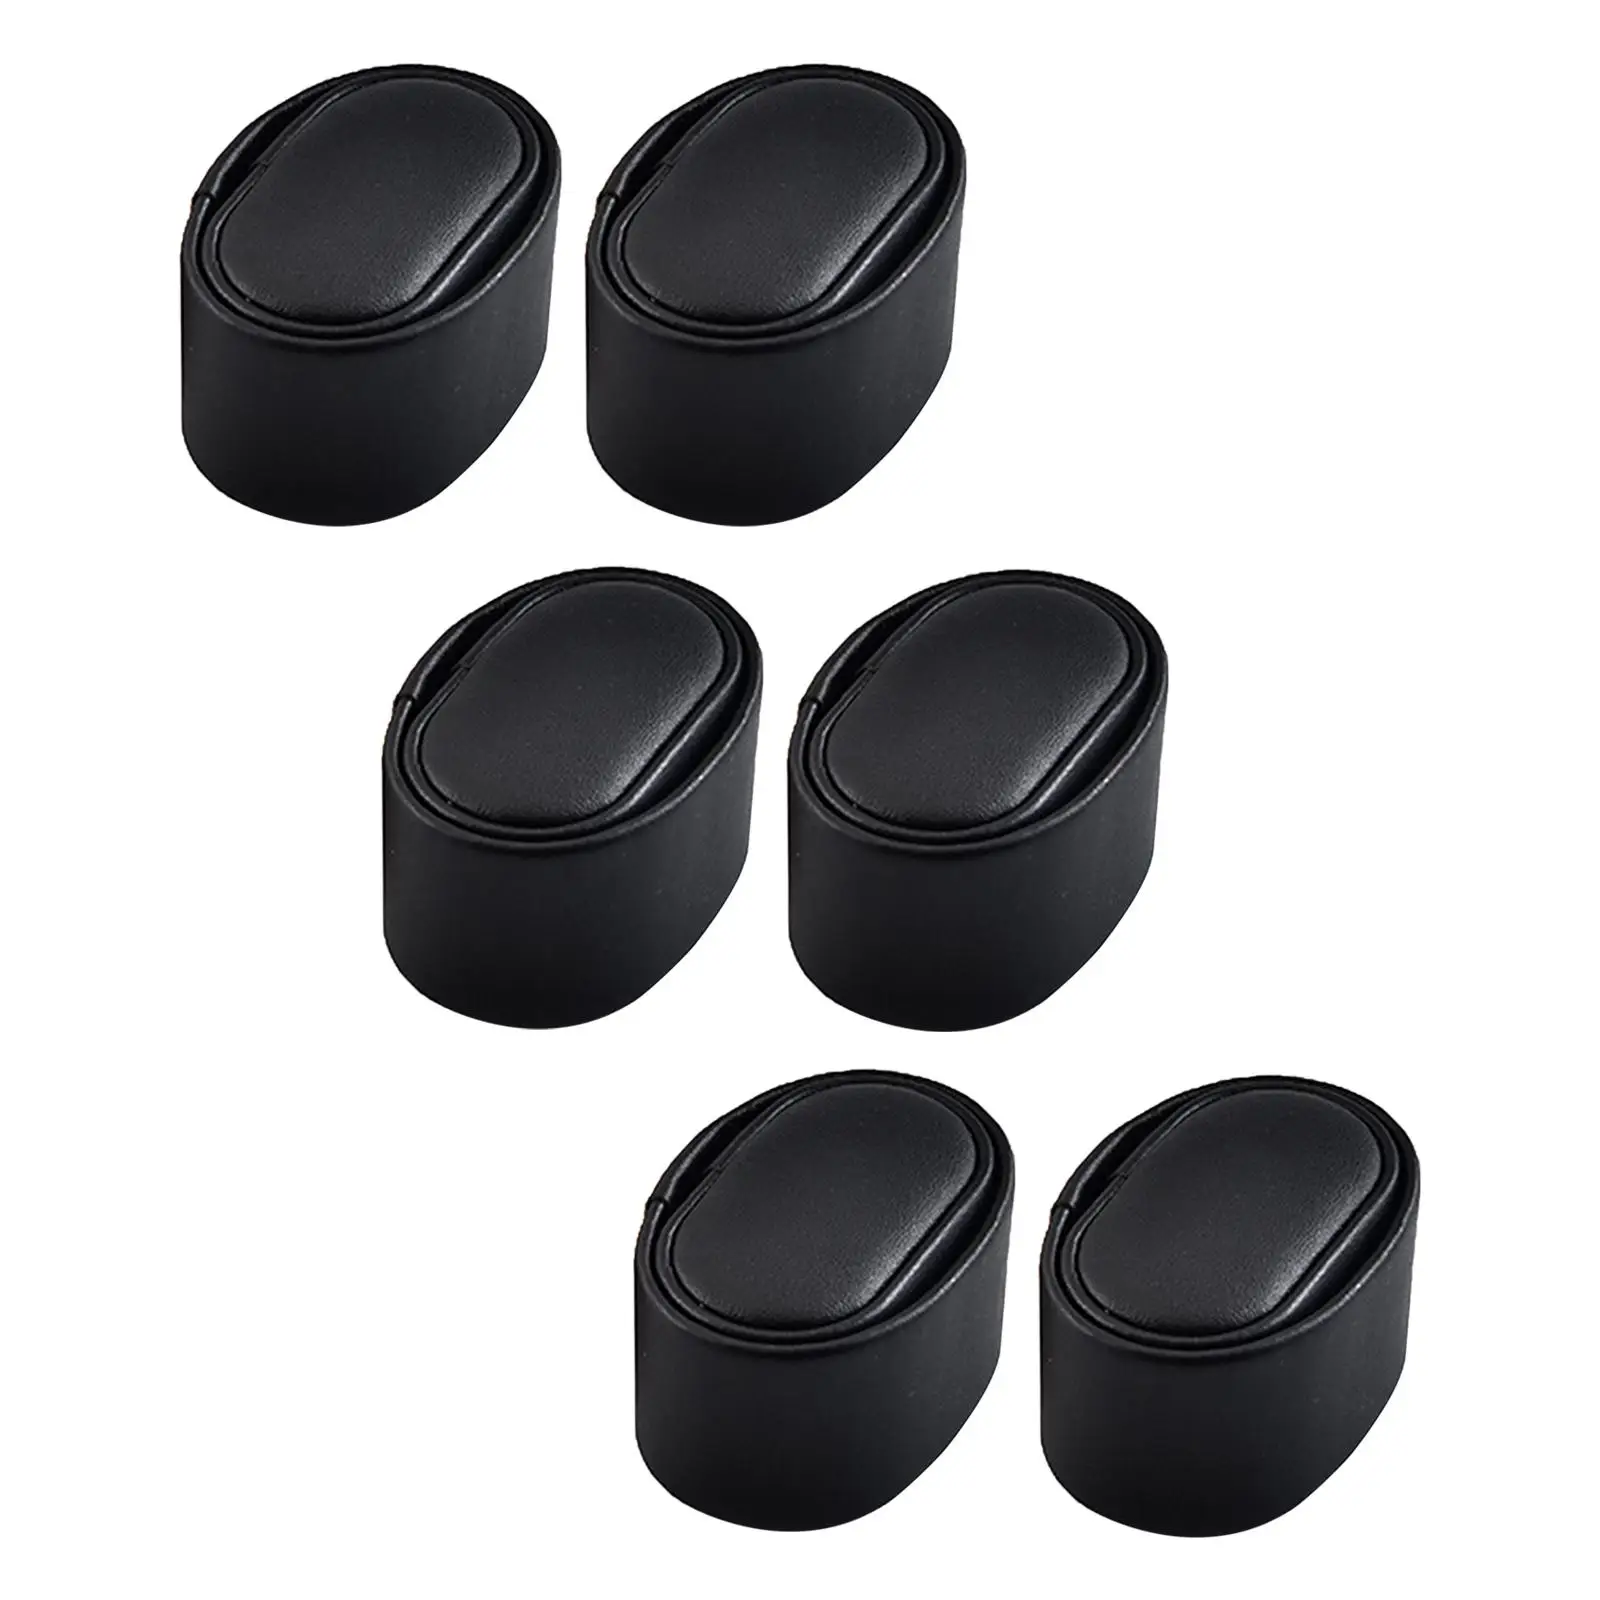 6 Pieces Watch Pillow Flexible Storage Case Jewelry Showcase Accessories Small Watch Cushion for Watch Replacement Box Men Women